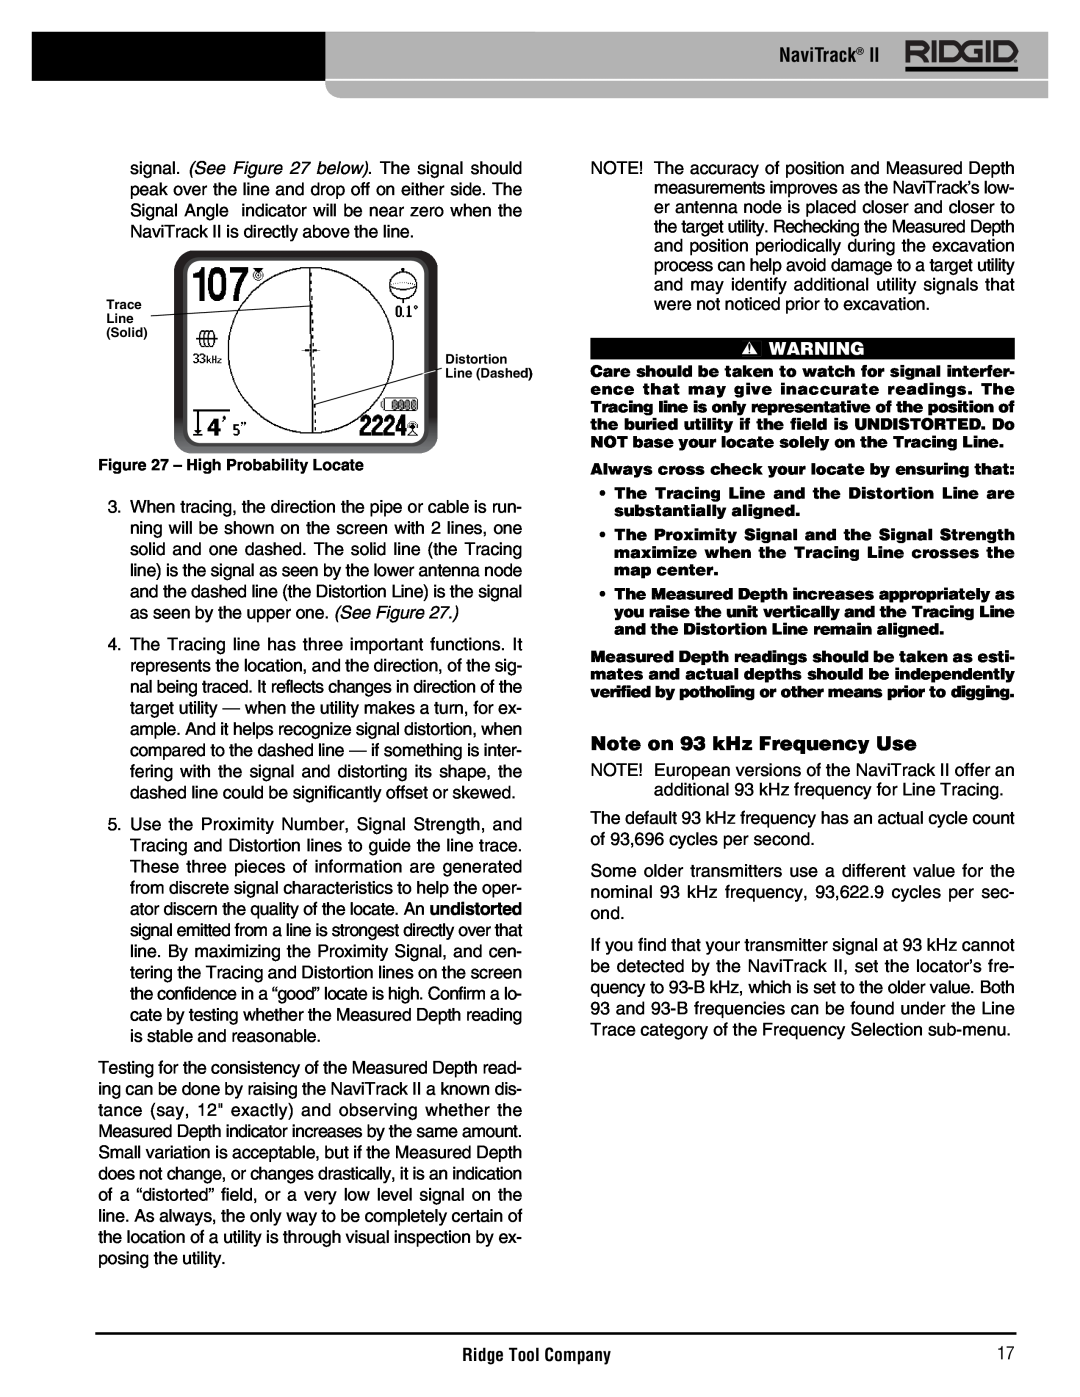 RIDGID Metal Detector manual Note on 93 kHz Frequency Use, NaviTrack, Ridge Tool Company, High Probability Locate 